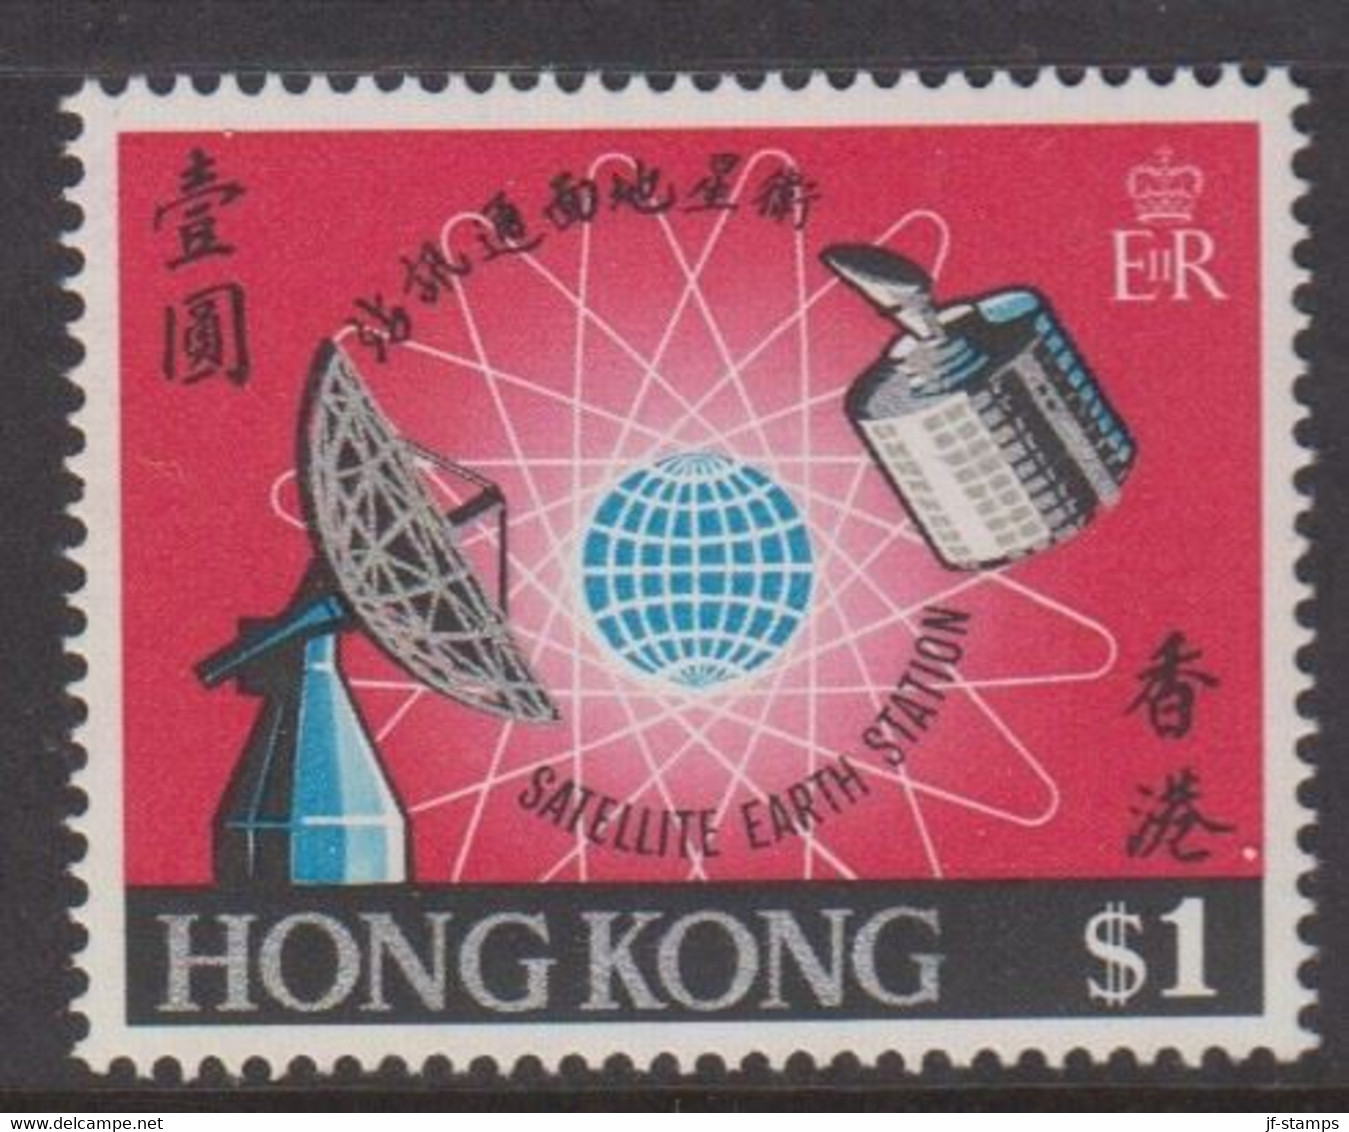 1961. HONG KONG SATELLITE EARTH STATION. $ 1. NEVER HINGED. (Michel 245) - JF422247 - Neufs